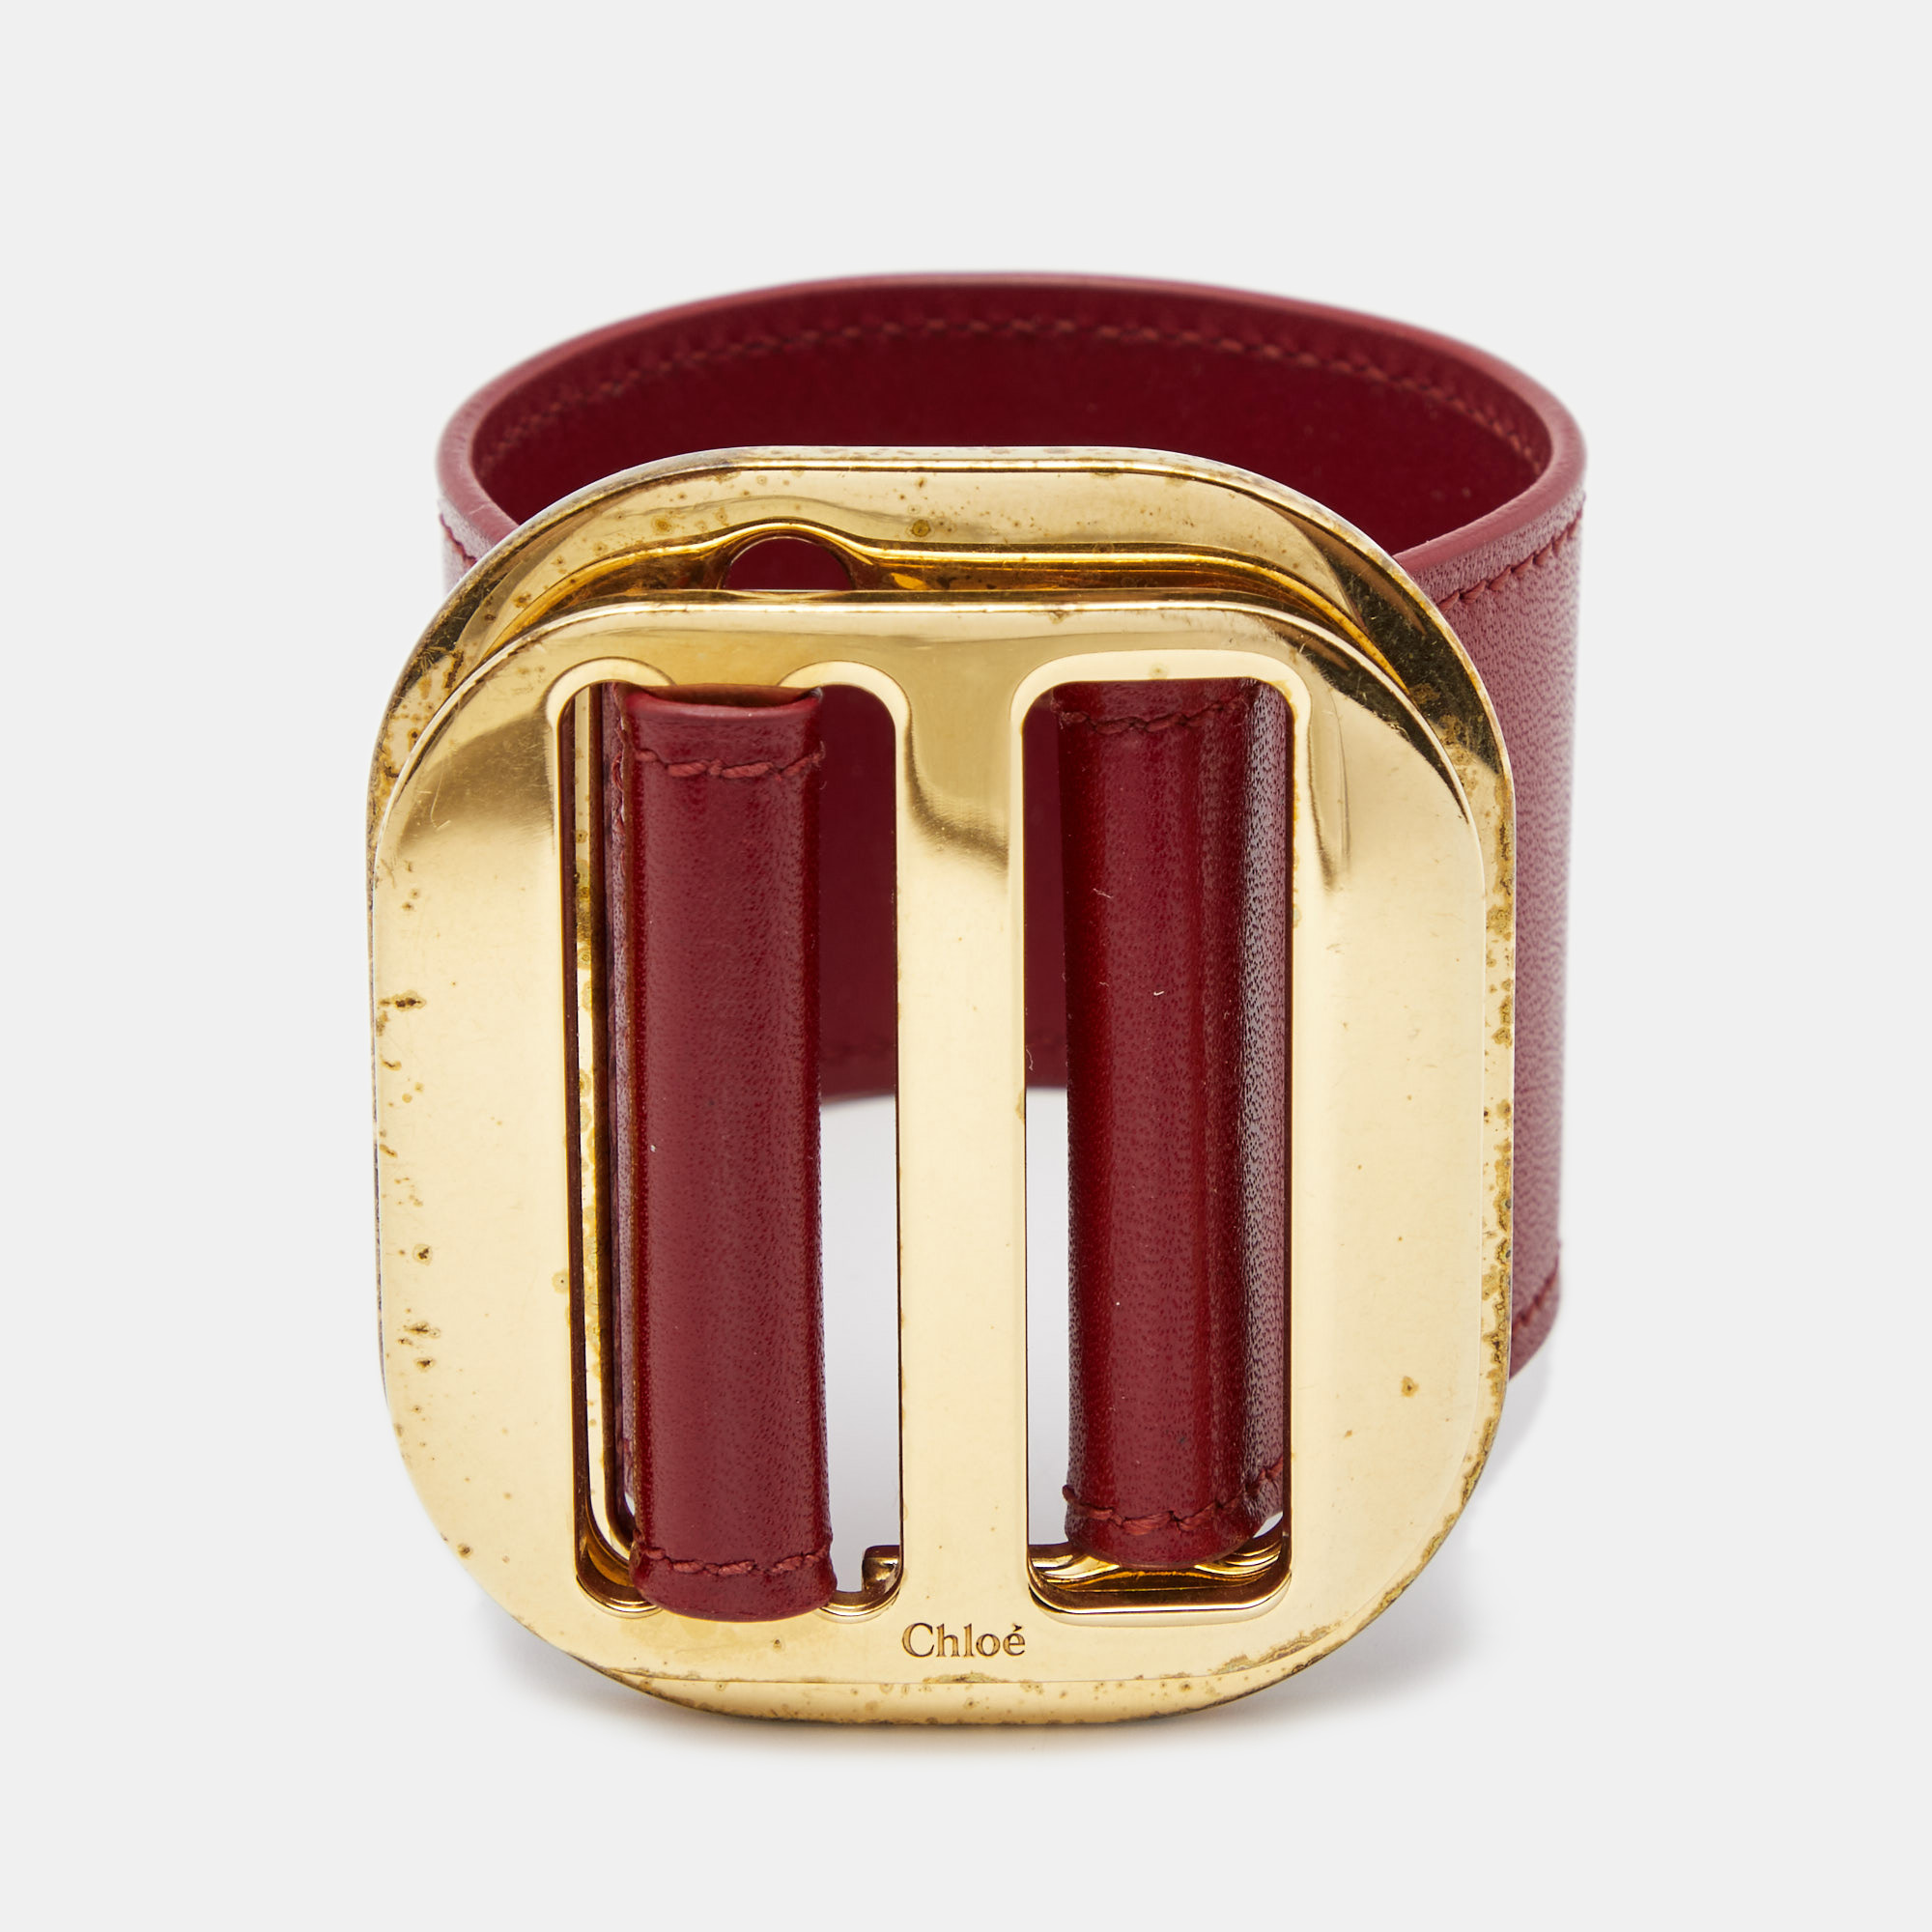 Chloe Red Leather Gold Tone Wide Bracelet